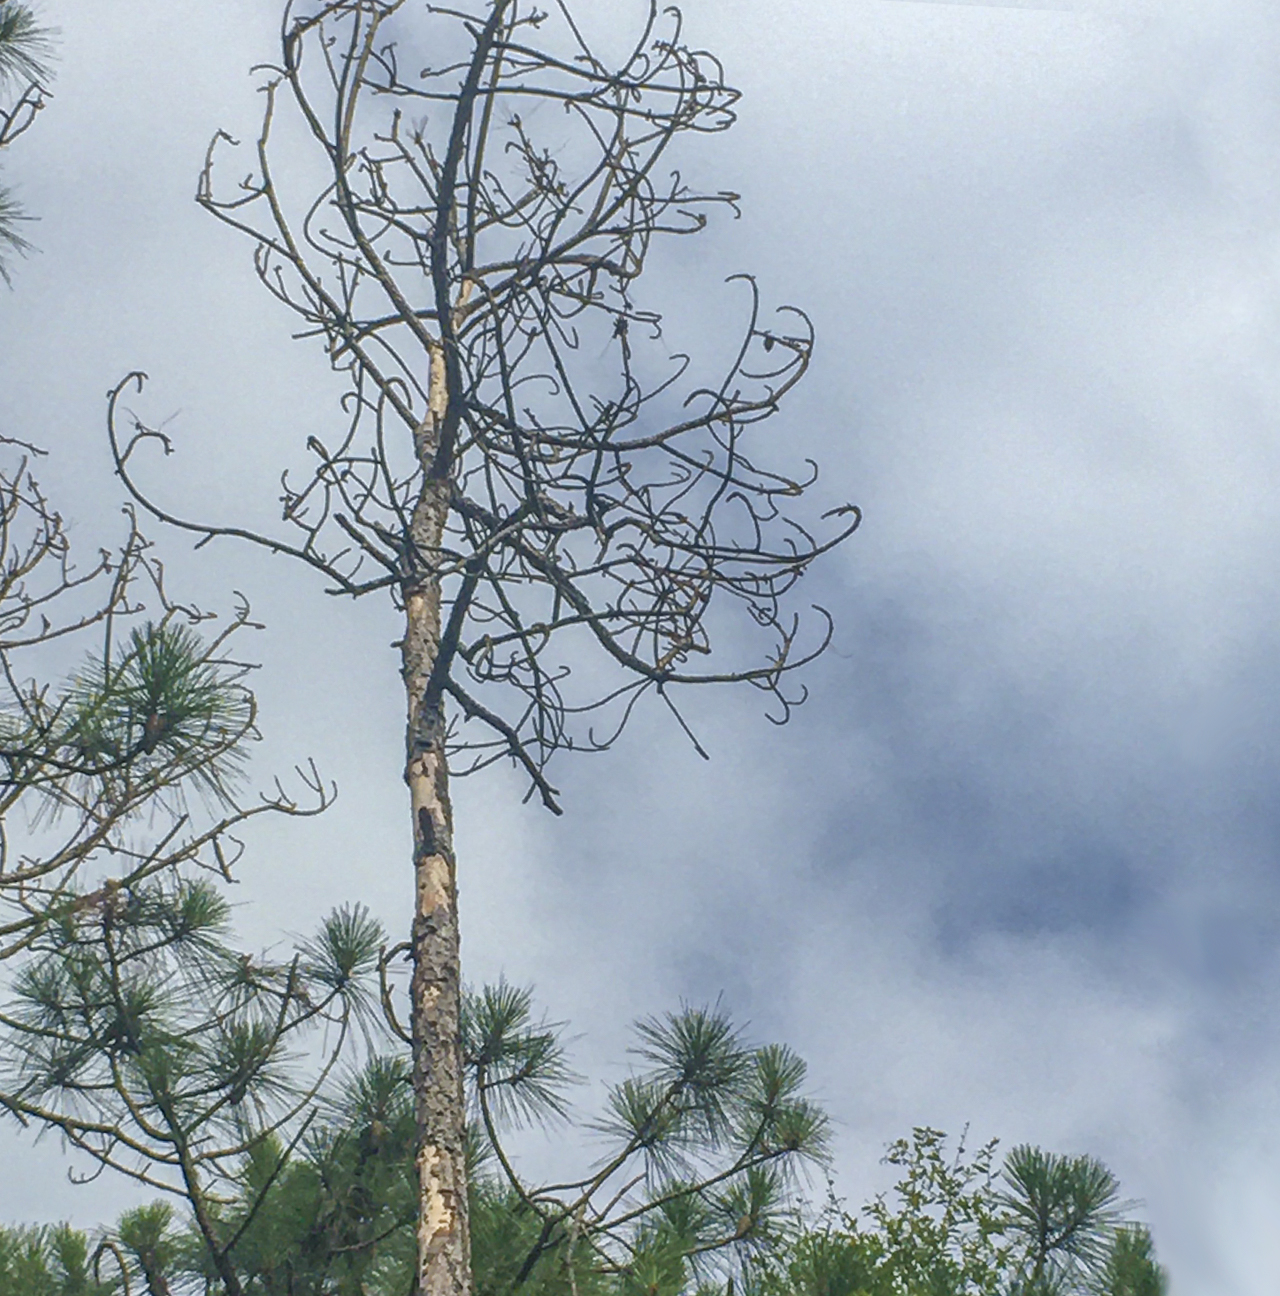 This pine near Lake Talquin began browning a few months after Hurricane Michael and is now completely dead. Removing dead and declining pines is important, because they can be an attractant to pine beetles. 